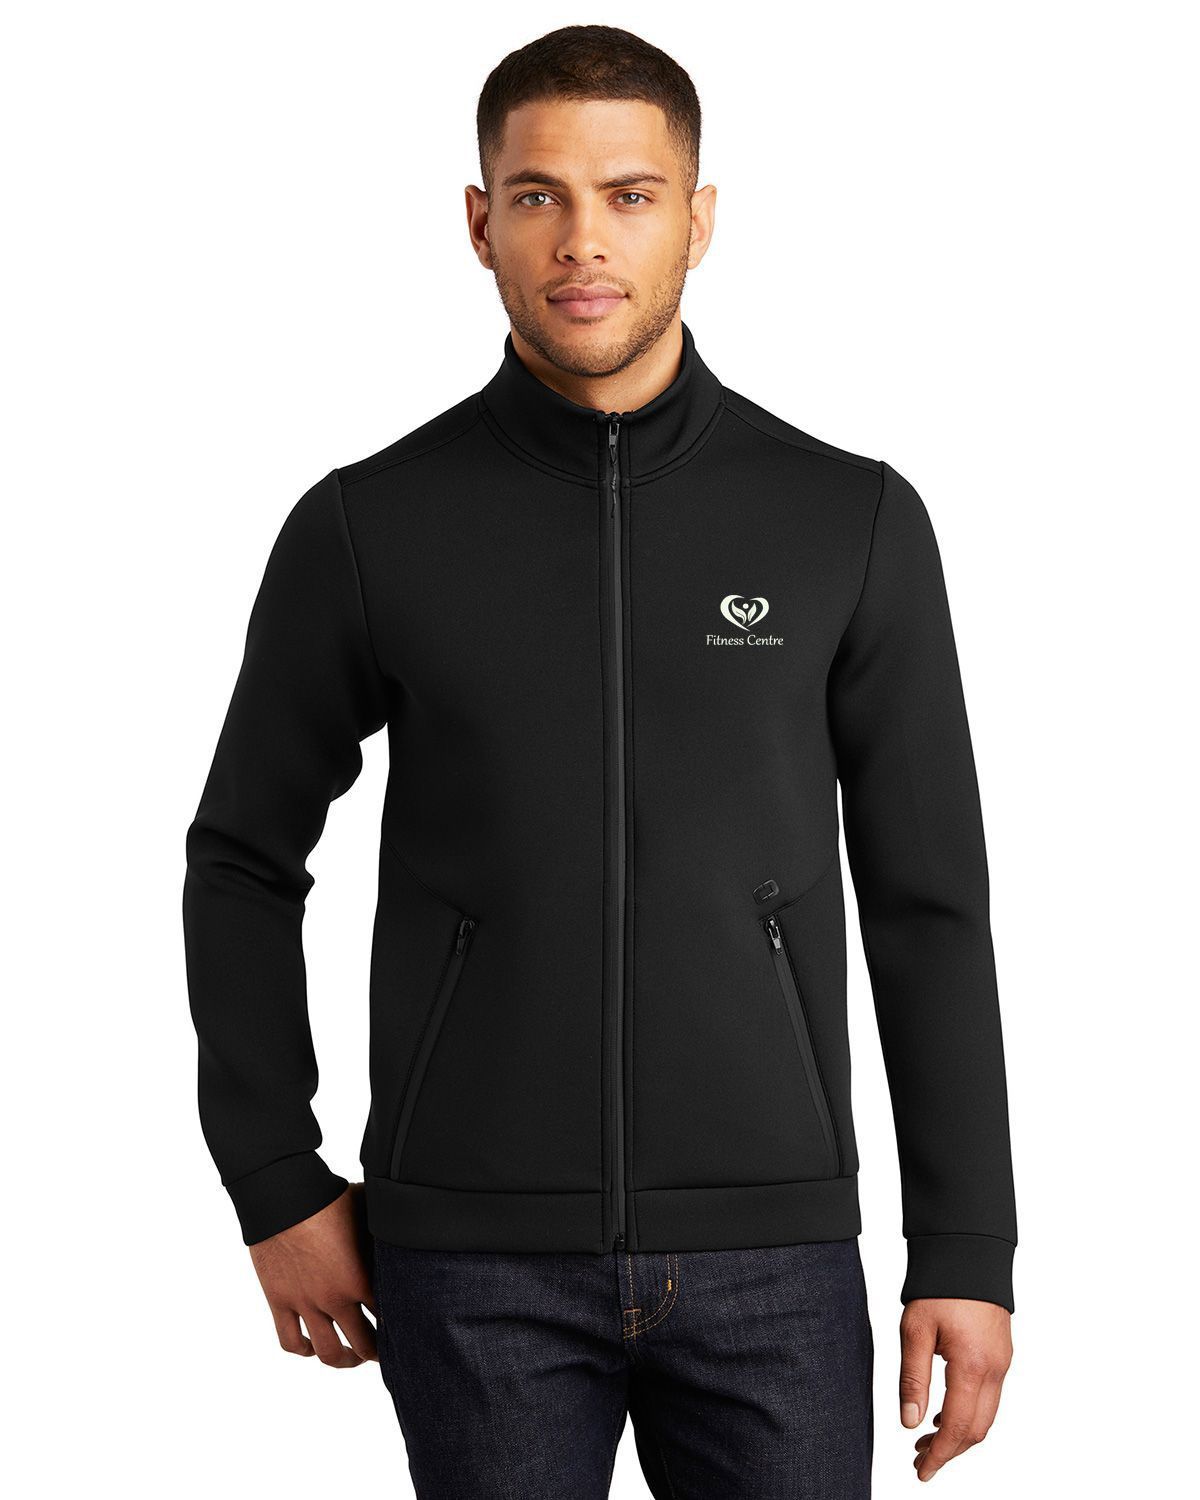 Reviews about Ogio OG724 Men's Axis Bonded Jacket